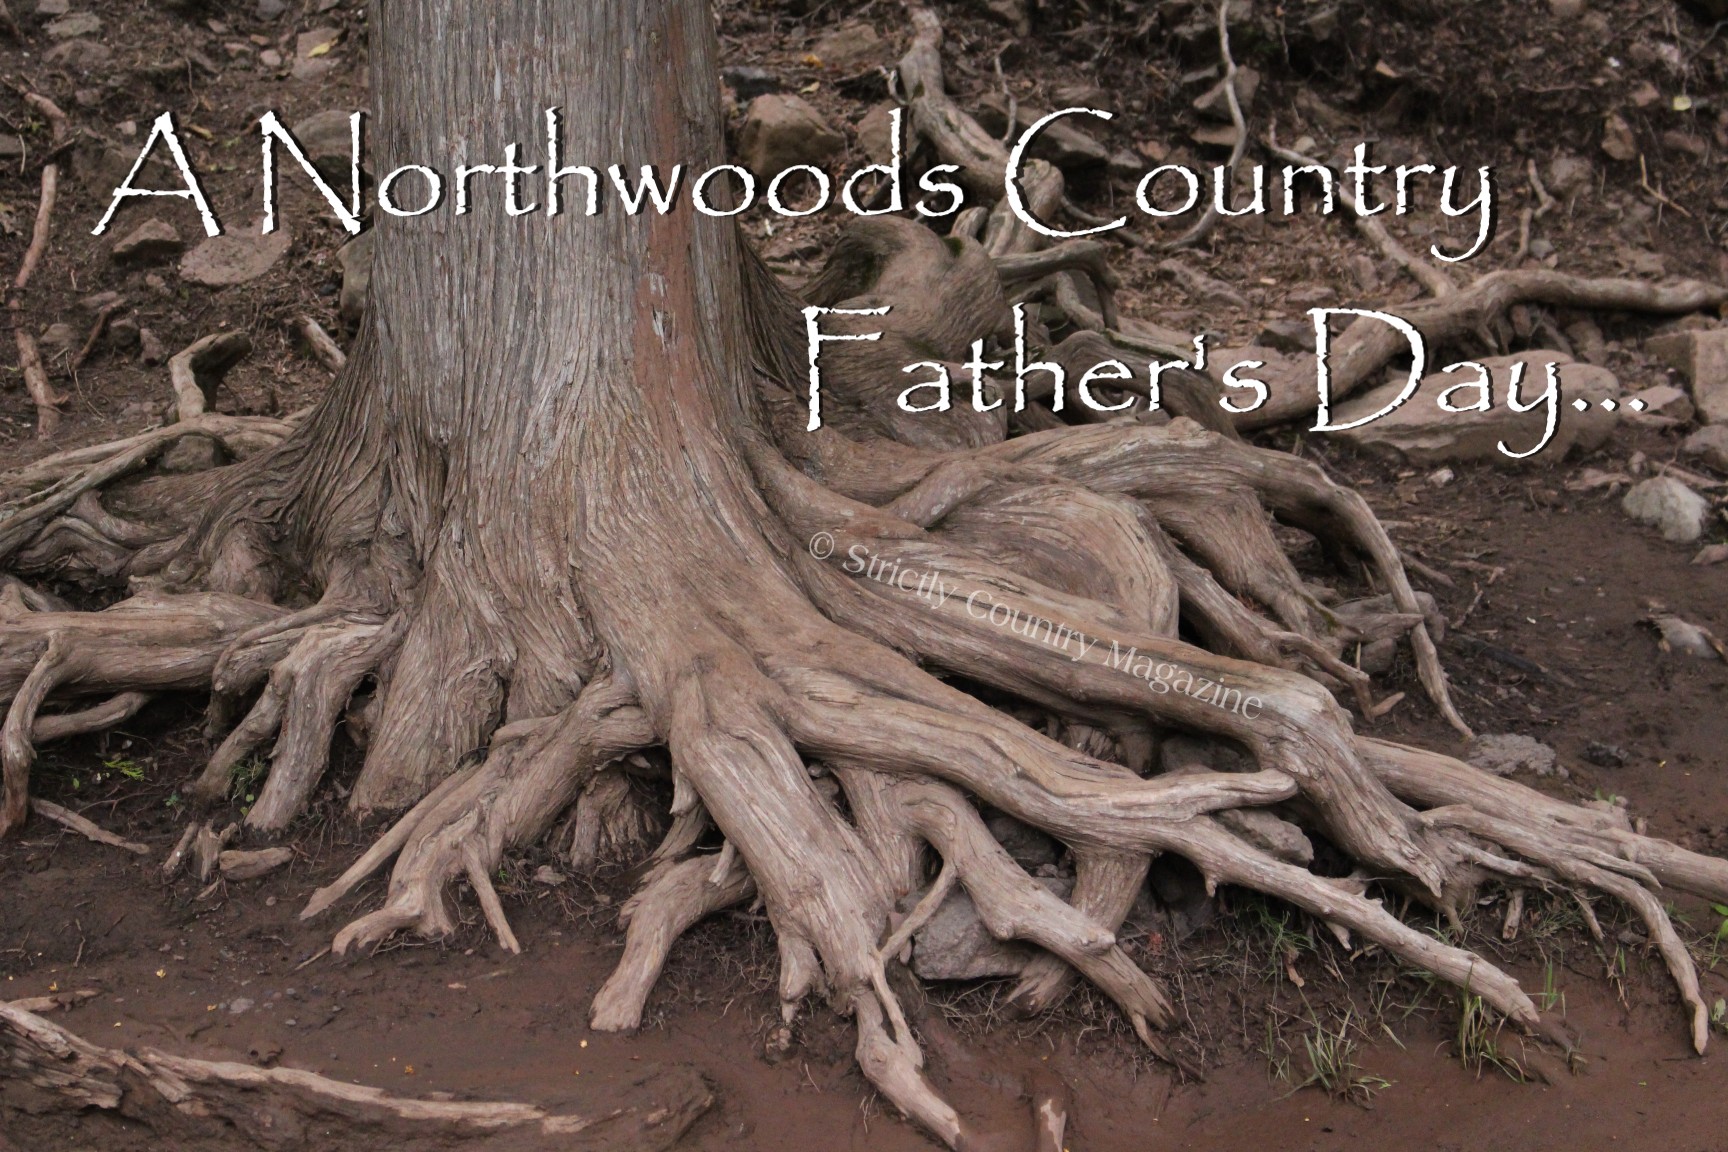 Strictly Country Magazine copyright A Northwoods Country Father's Day title